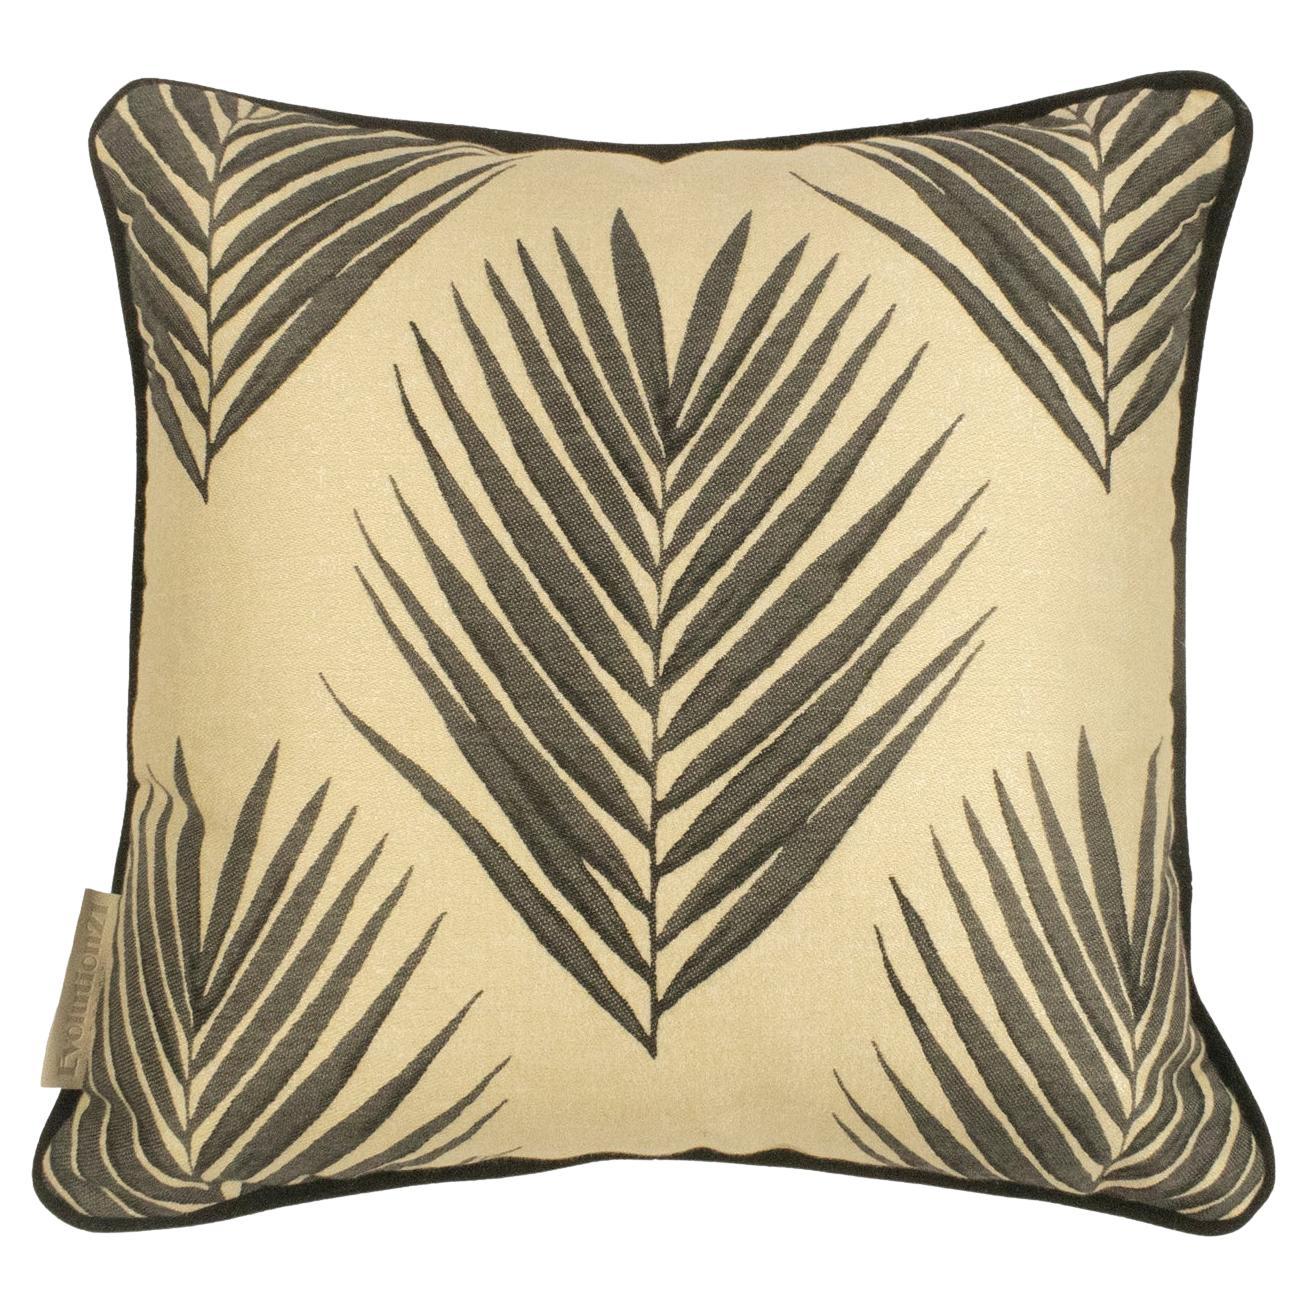 Cushion / Pillow Patterned Bamboo Leaf Greyback by Evolution21 For Sale